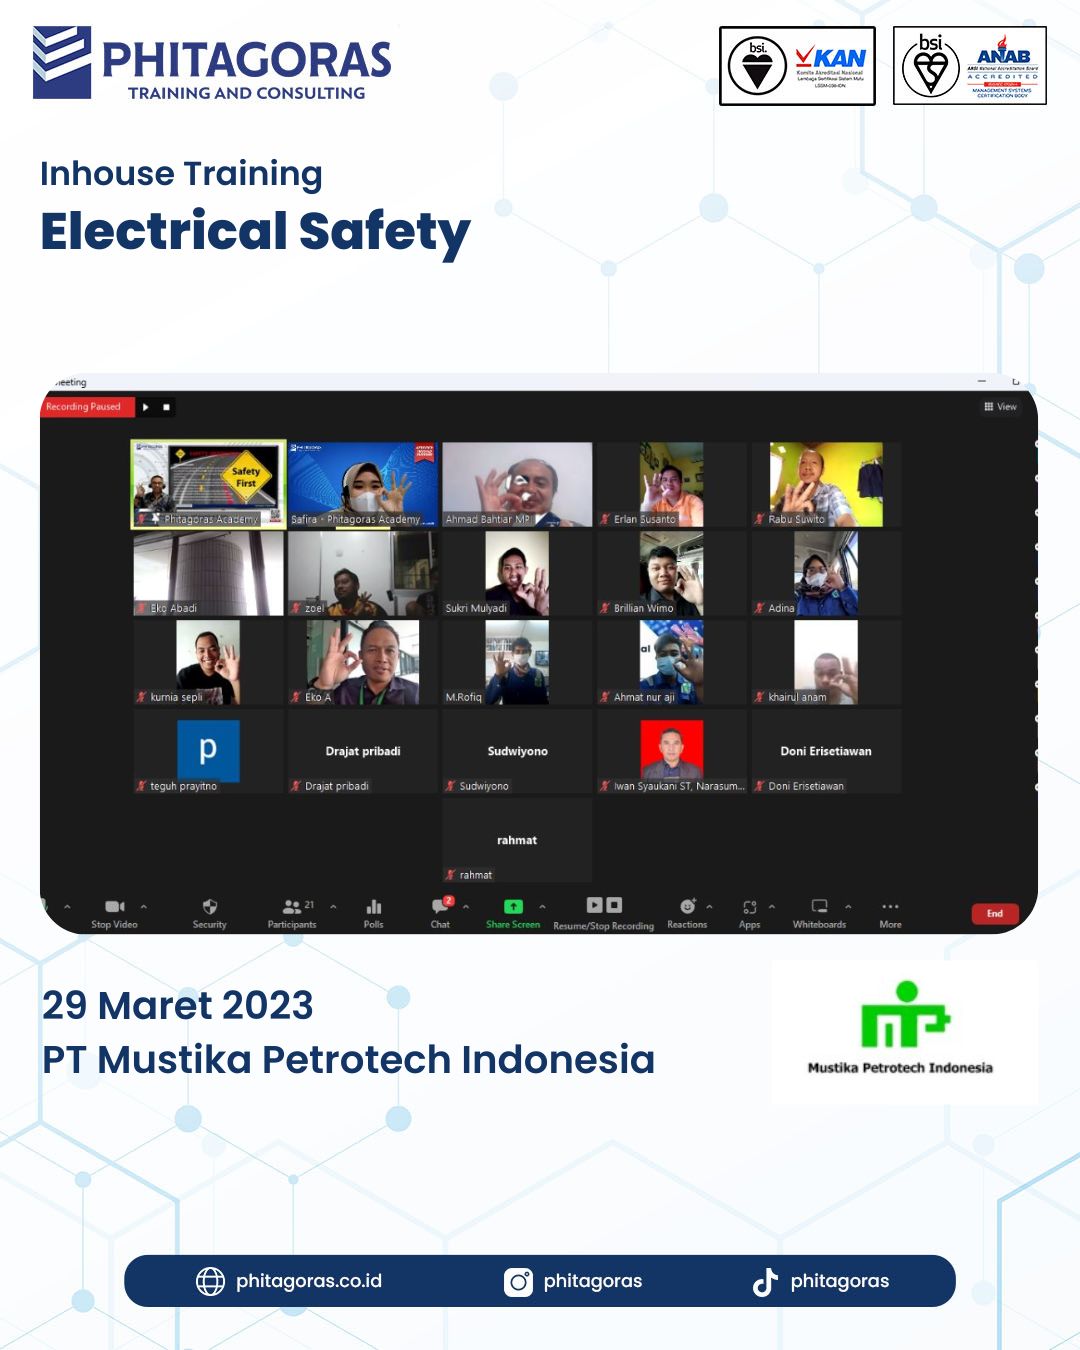 Inhouse Training Electrical Safety - PT Mustika Petrotech Indonesia